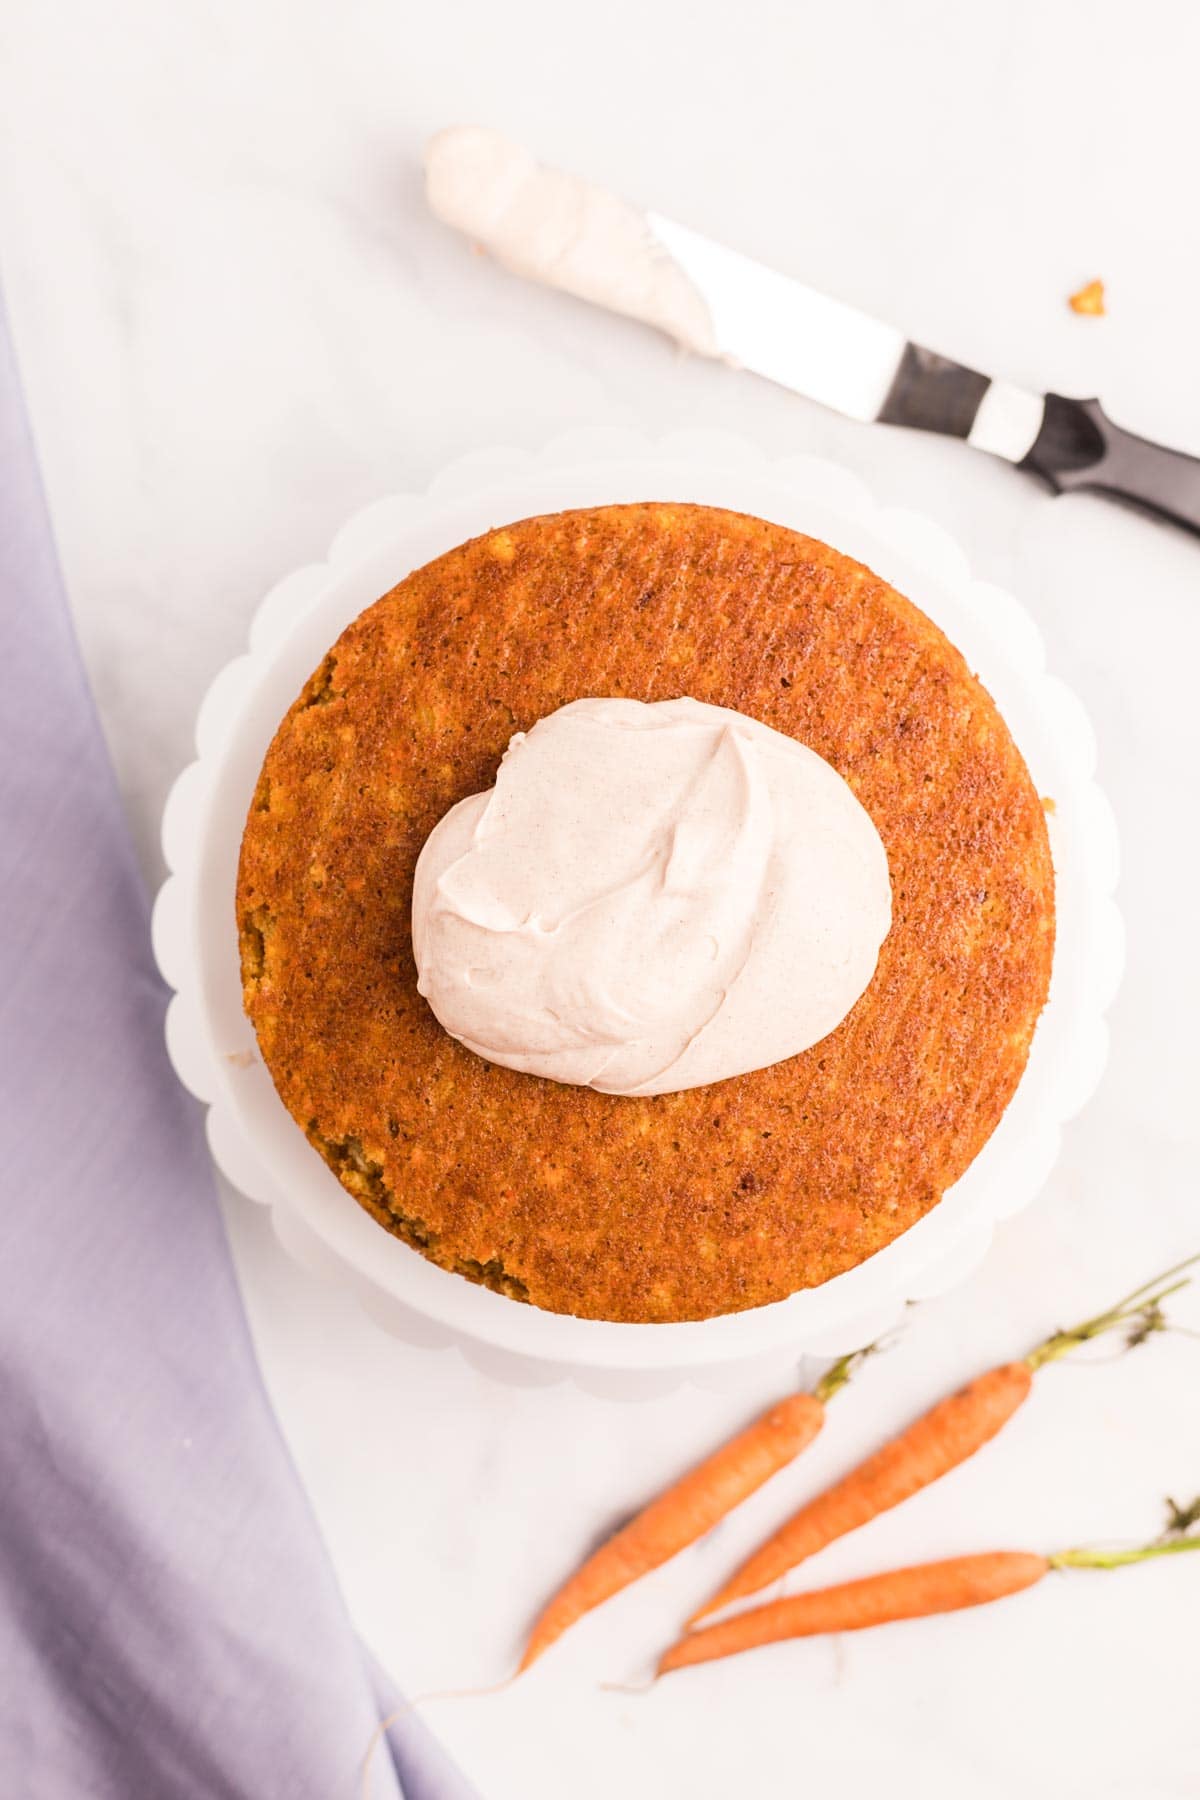 cream cheese frosting on top of a carrot cake